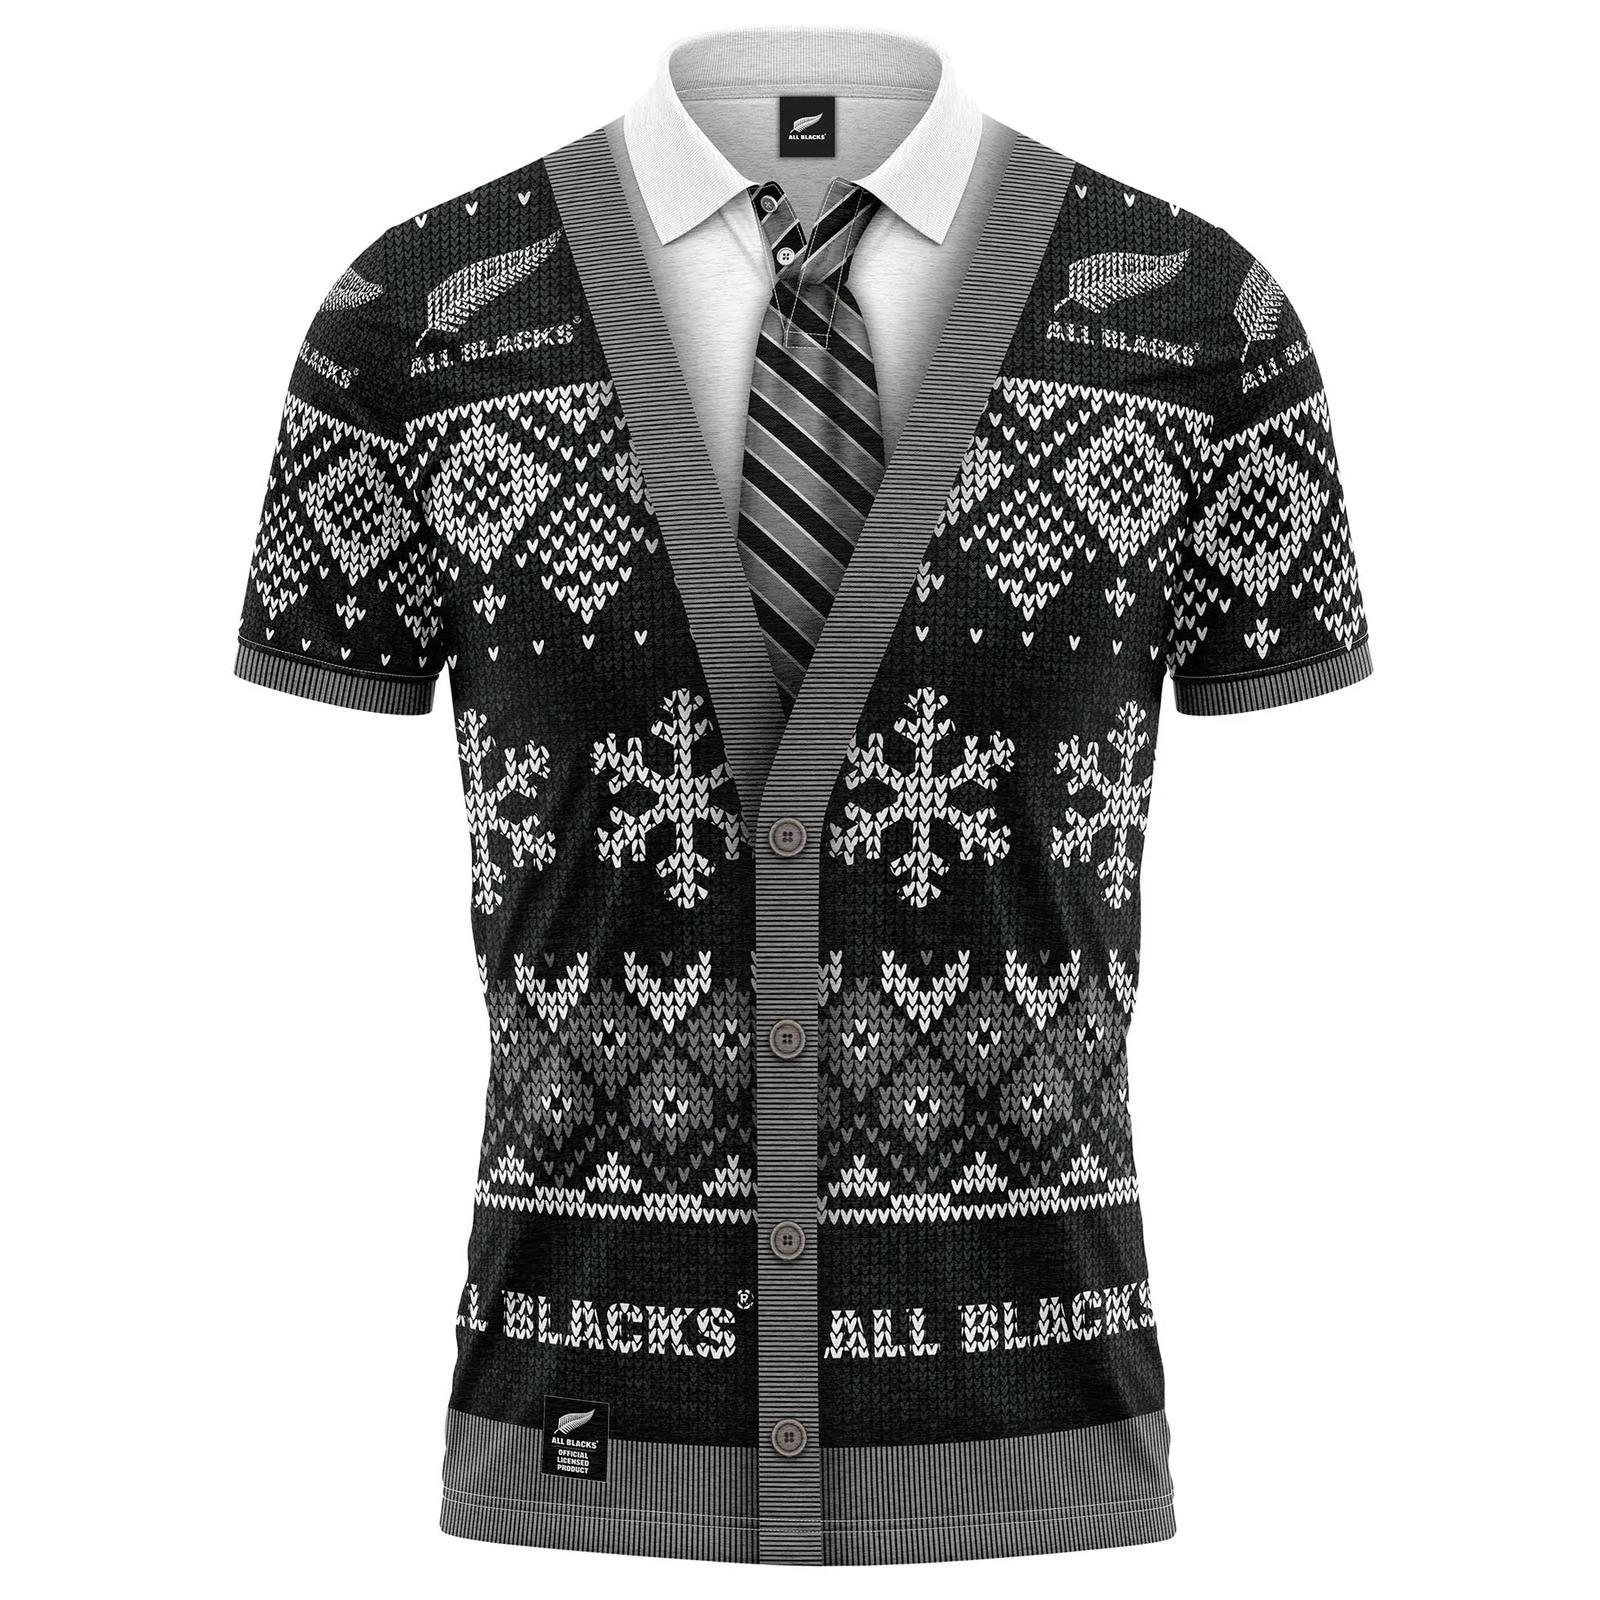 New Zealand All Blacks Super Rugby Xmas Shirt Sizes S-5XL! [Size: Small]